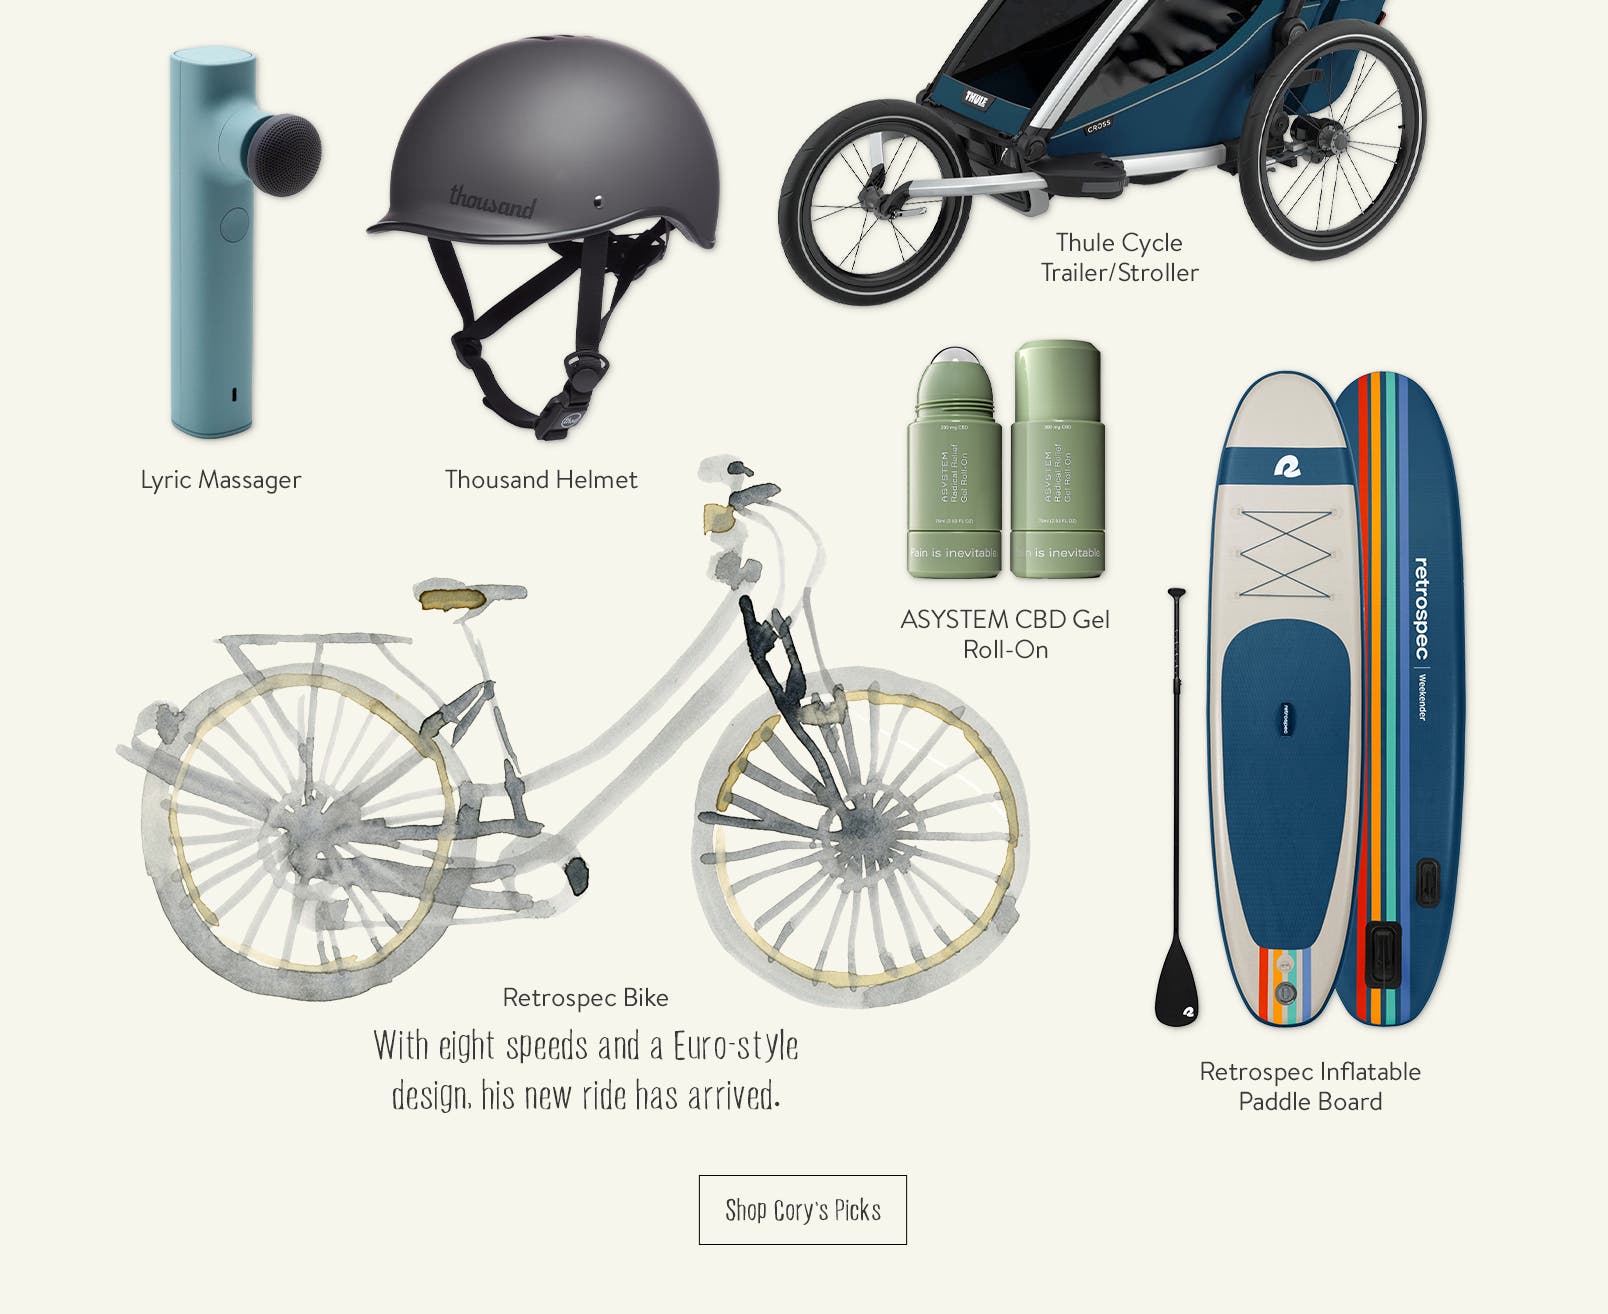 Father's Day gift picks, including outdoor gear, shoes and a stroller.